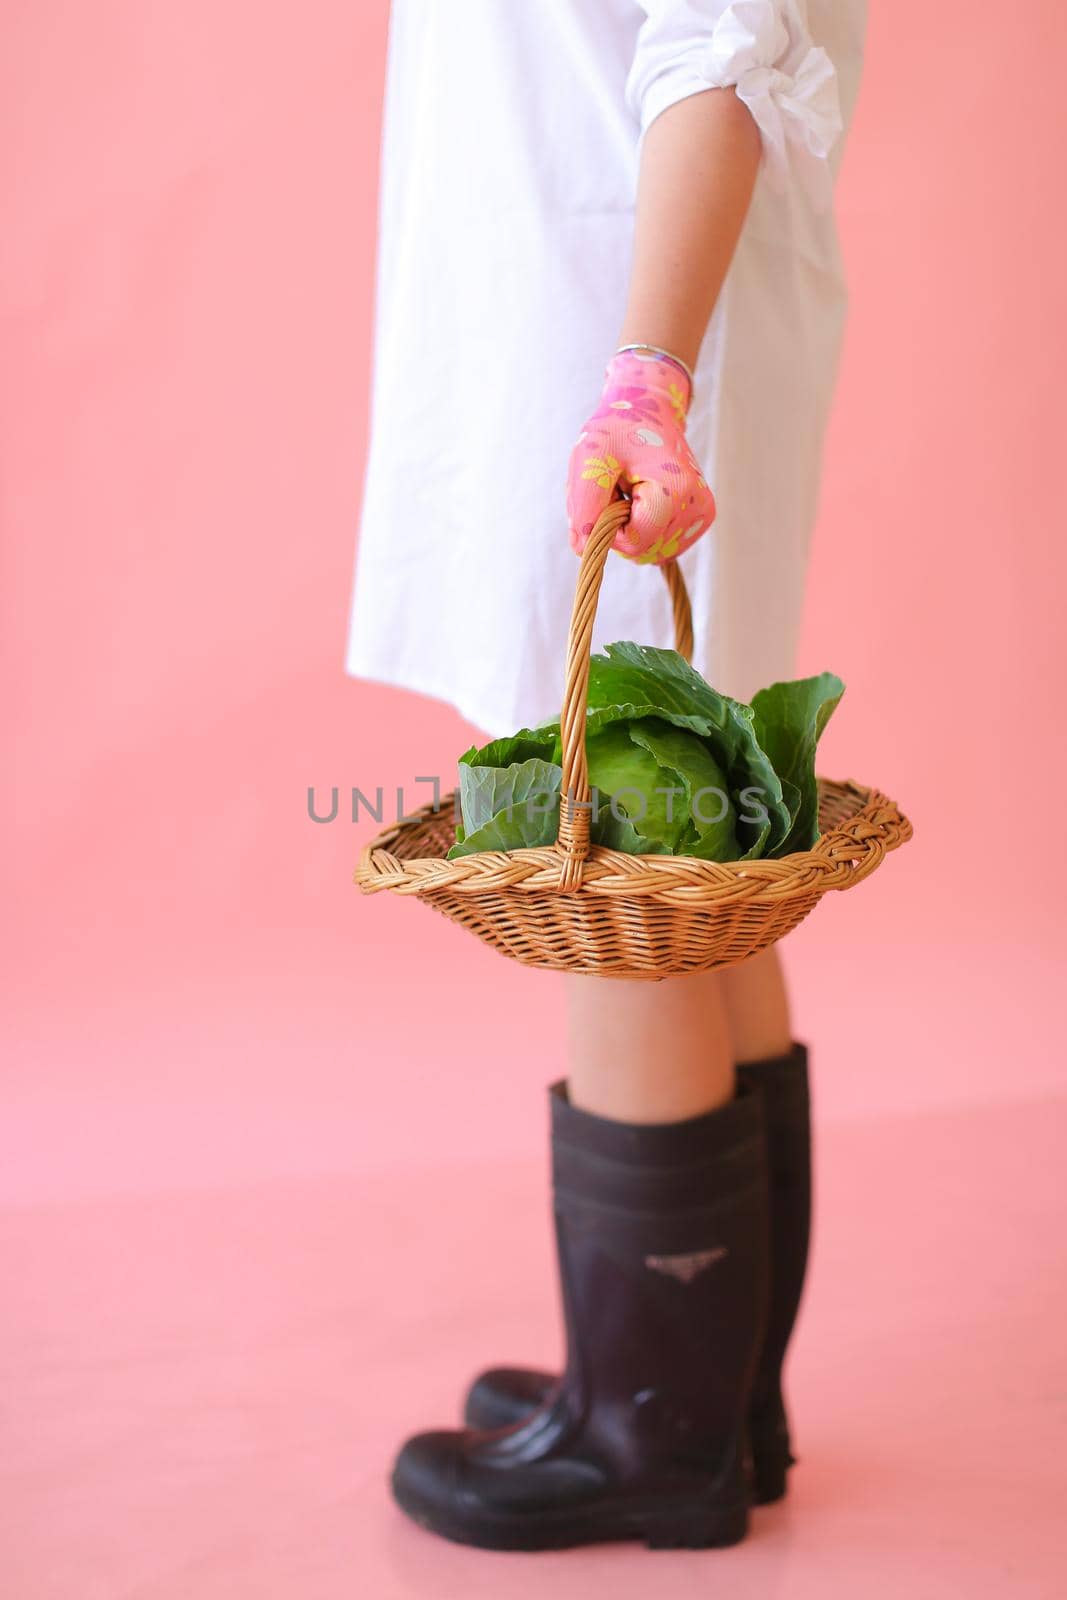 Woman keeping basket with cabbages in pink monophonc background. Concept of harvest photo session at studio.